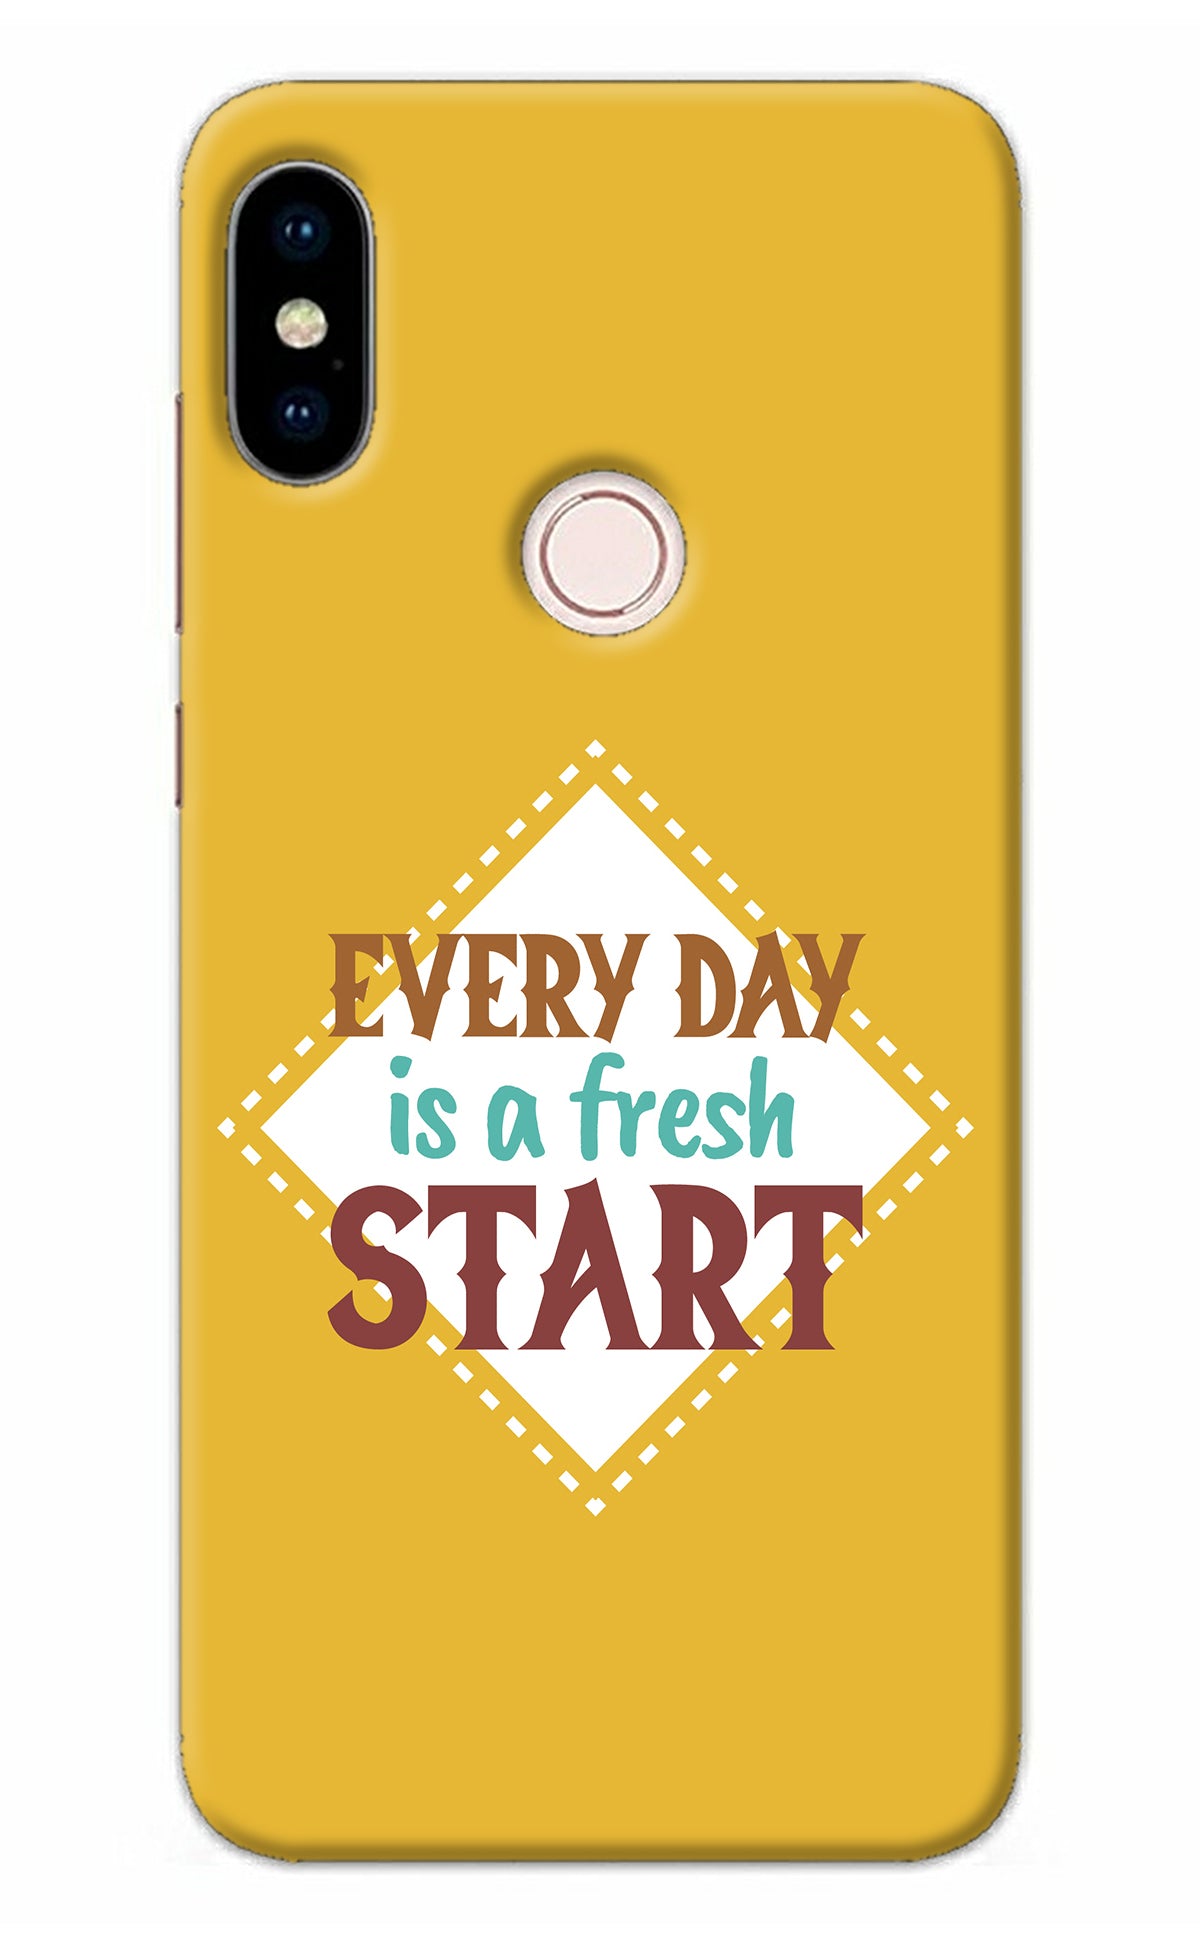 Every day is a Fresh Start Redmi Note 5 Pro Back Cover